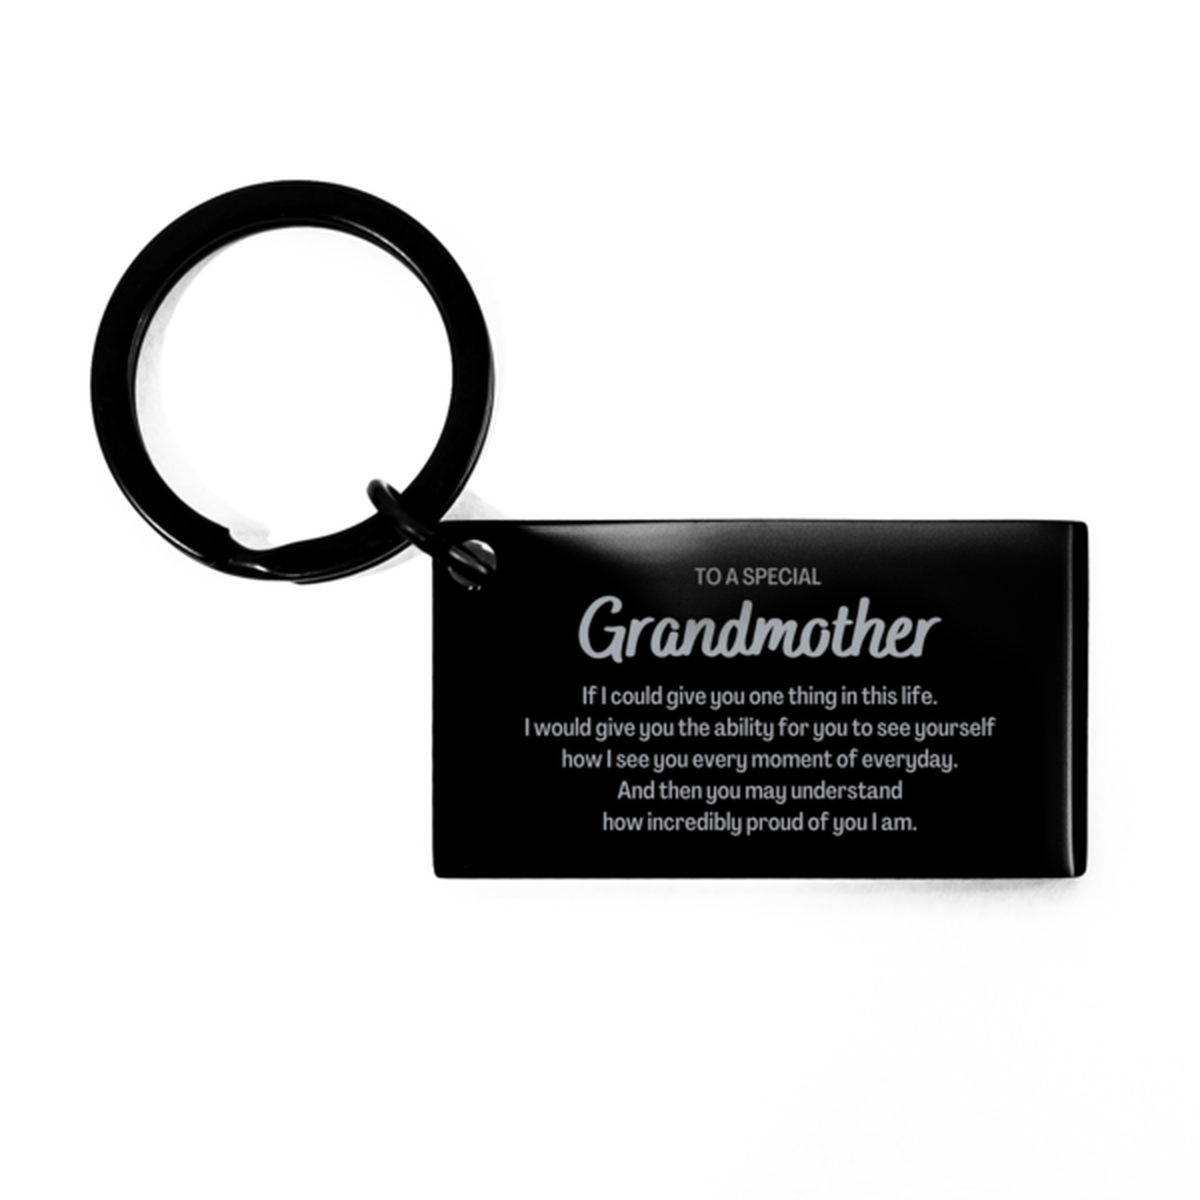 To My Grandmother Keychain, Gifts For Grandmother Engraved, Inspirational Gifts for Christmas Birthday, Epic Gifts for Grandmother To A Special Grandmother how incredibly proud of you I am